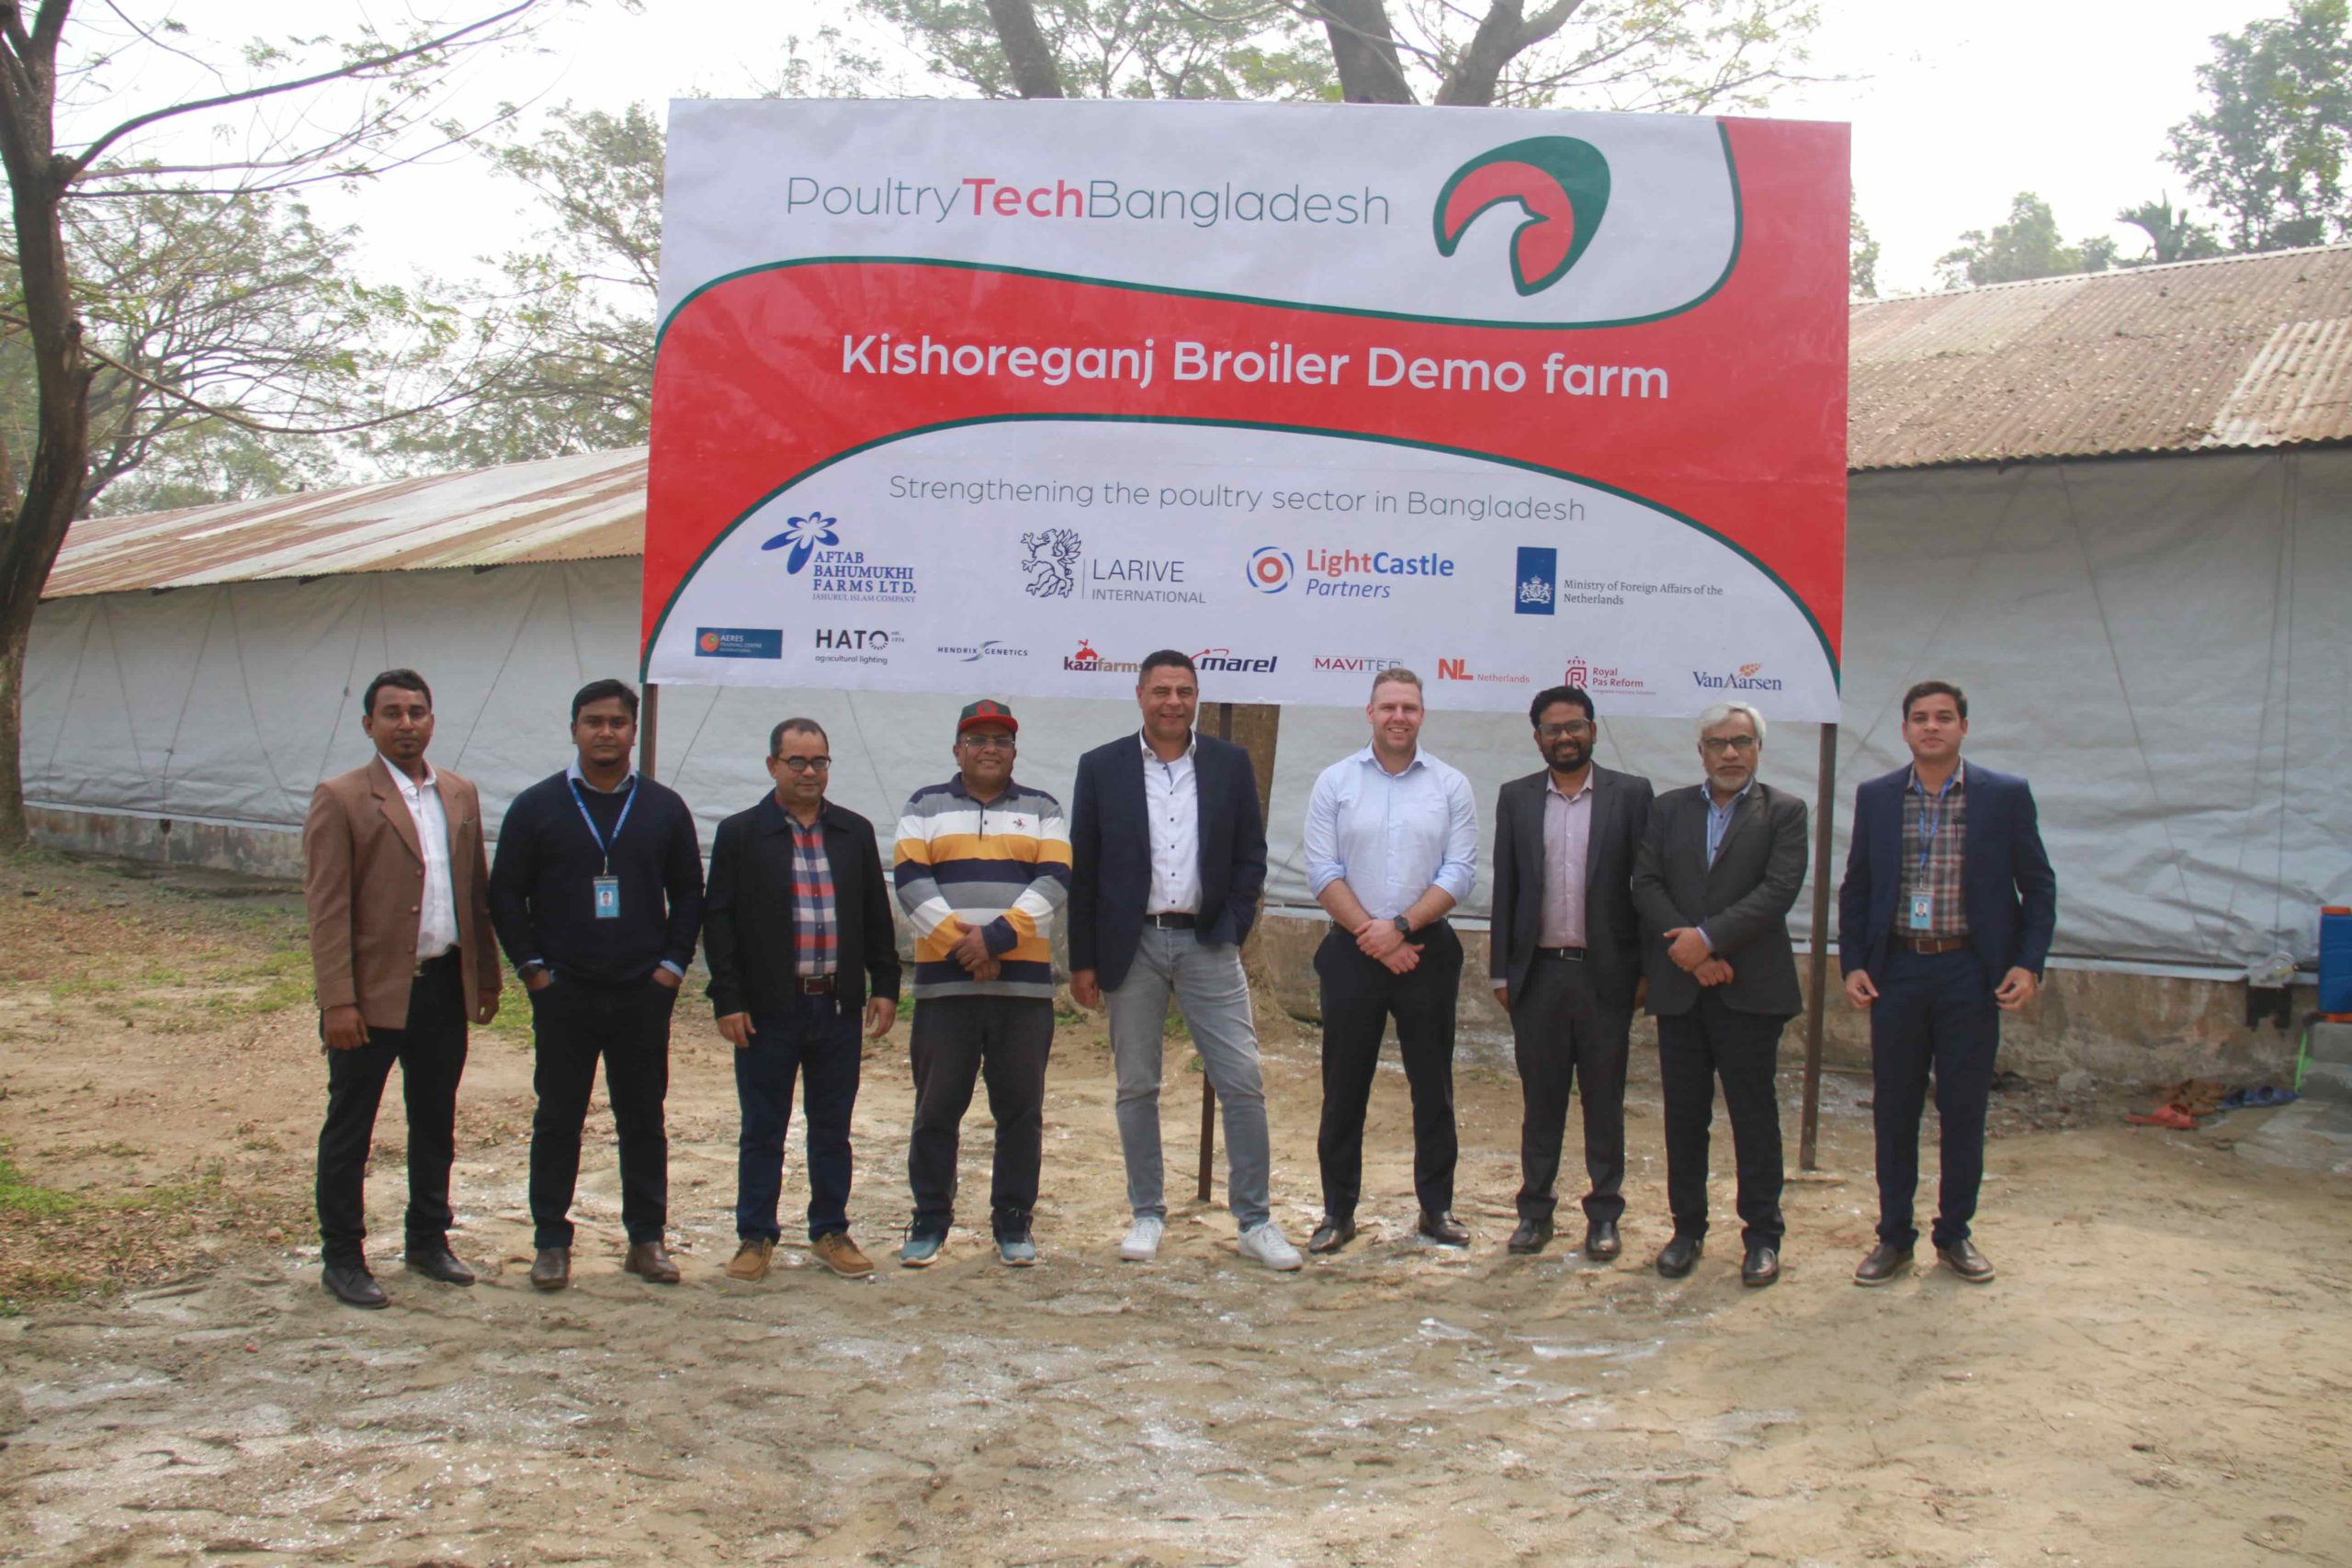 Members of the Dutch Delegation, led by Mr. André van Ommeren of the Netherlands Enterprise Agency, along with Representatives from LightCastle Partners and Aftab Bahumukhi Farms